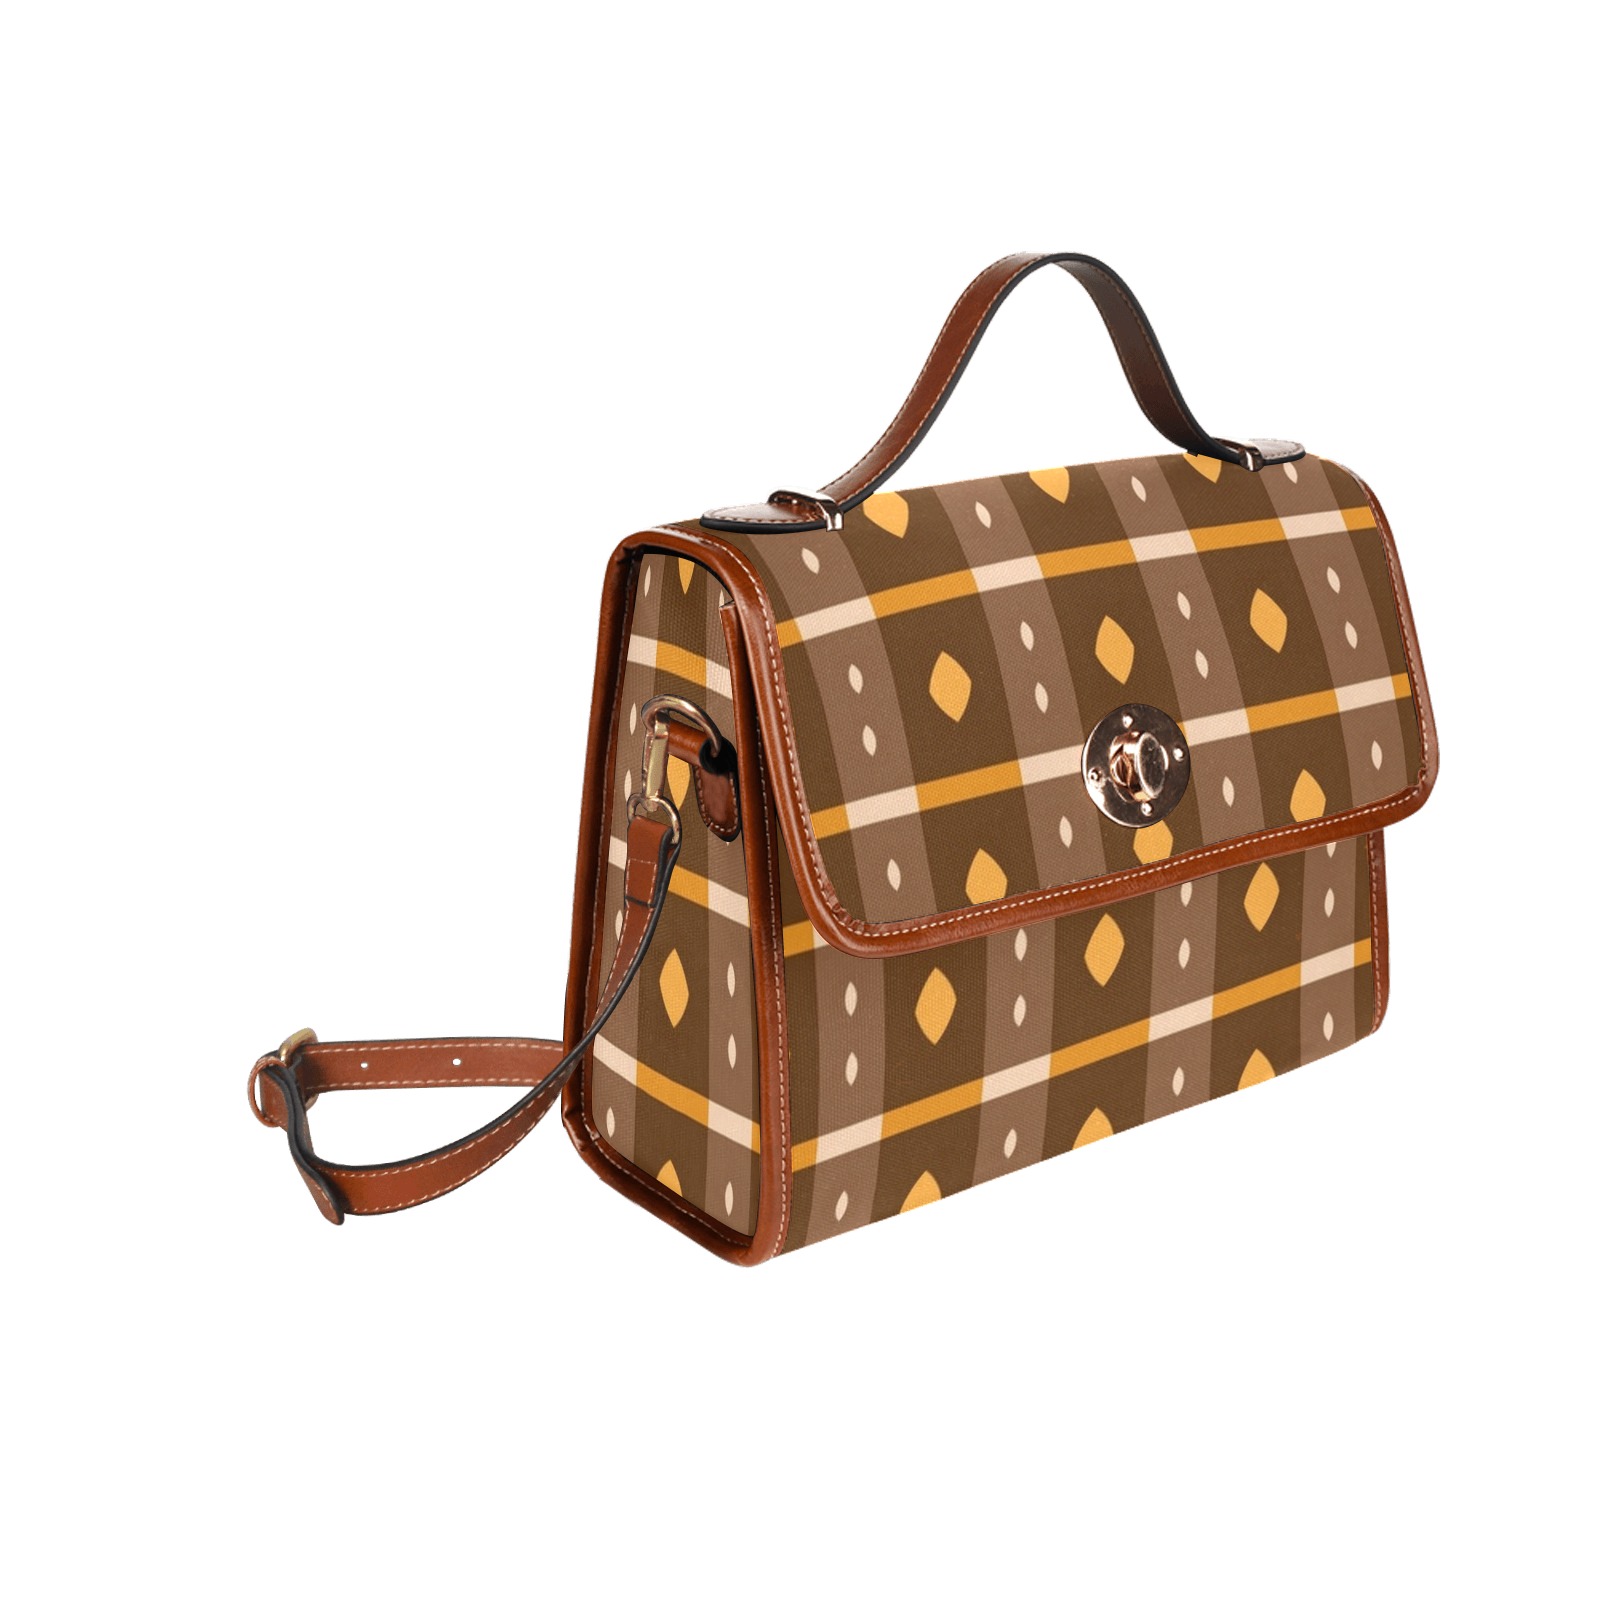 surface_pmm_geometric-mural-background_23-2148702409_5000x5000 (1) Waterproof Canvas Bag-Brown (All Over Print) (Model 1641)